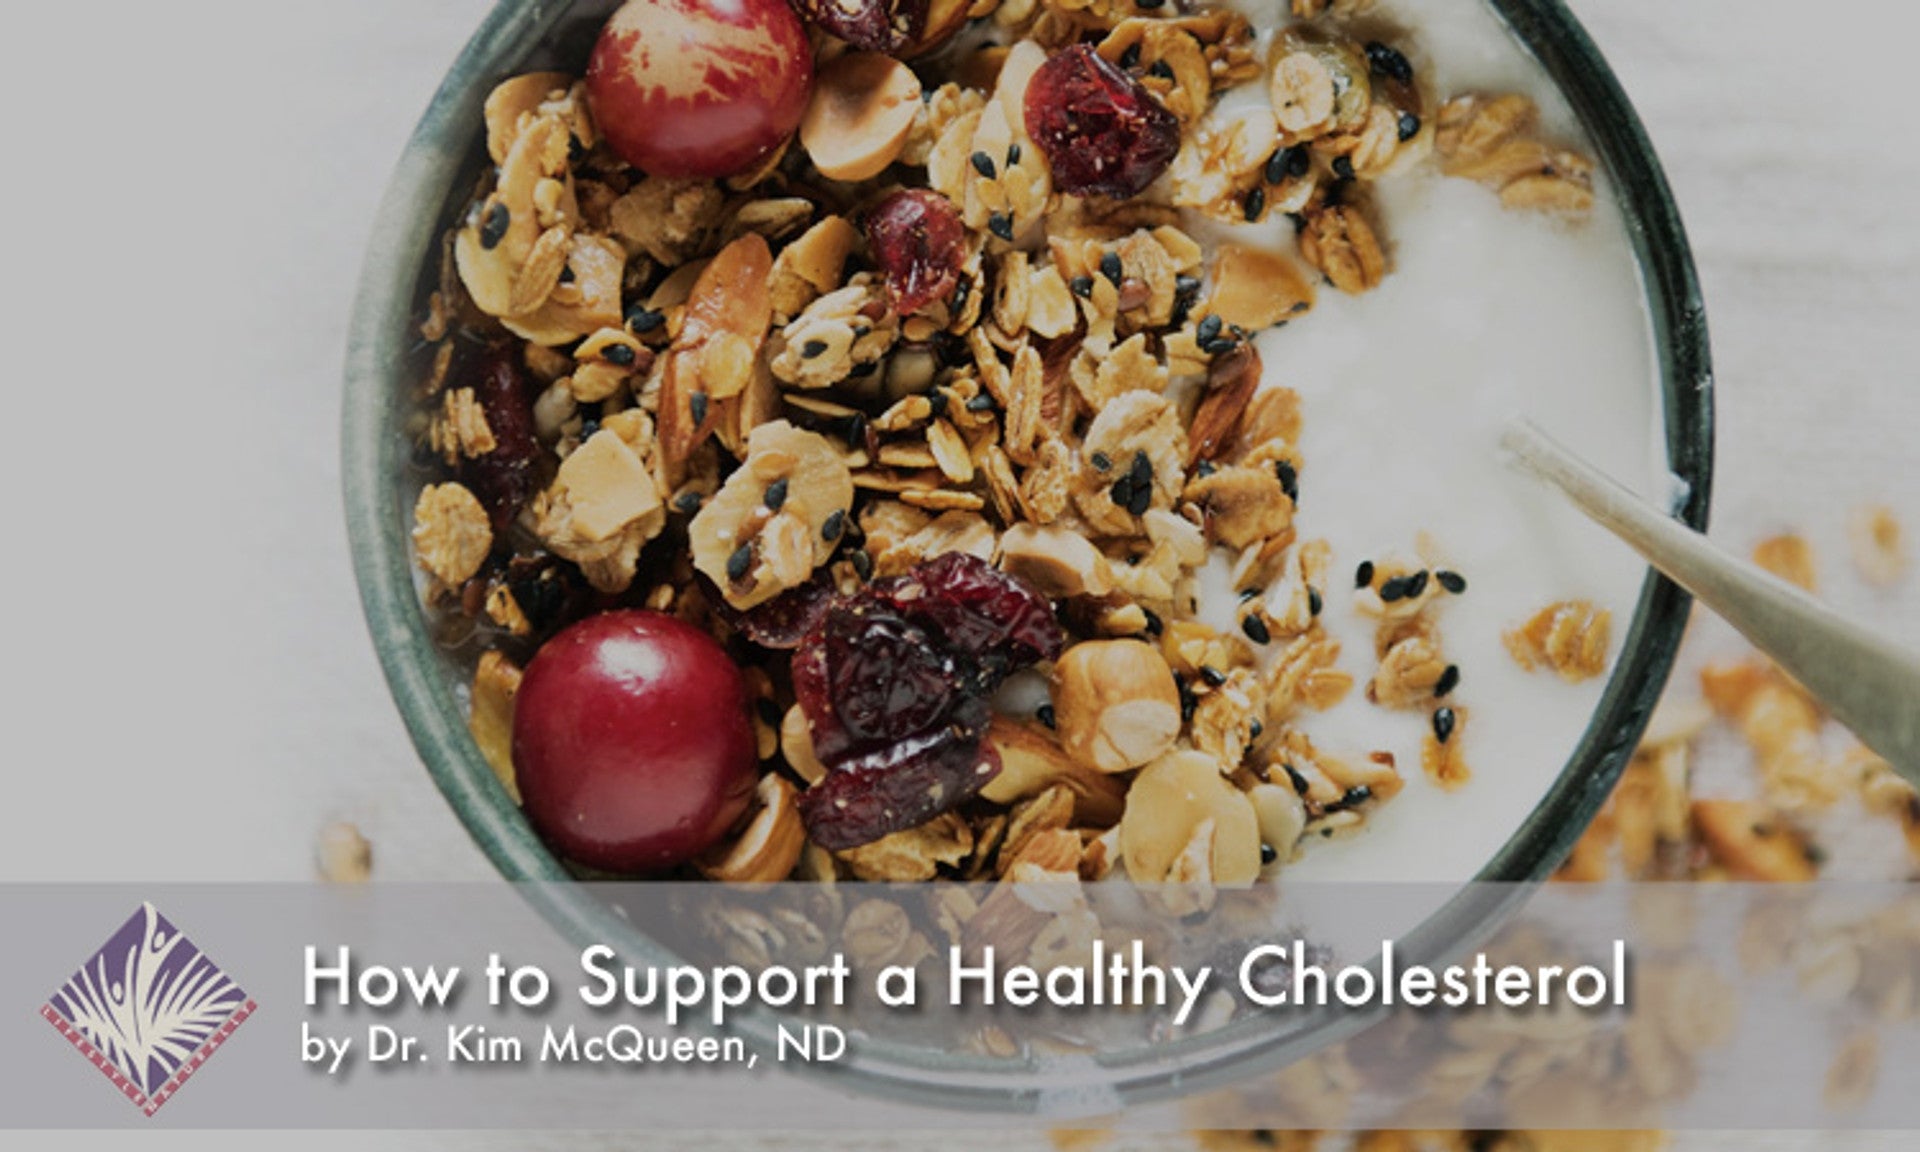 How to Support a Healthy Cholesterol